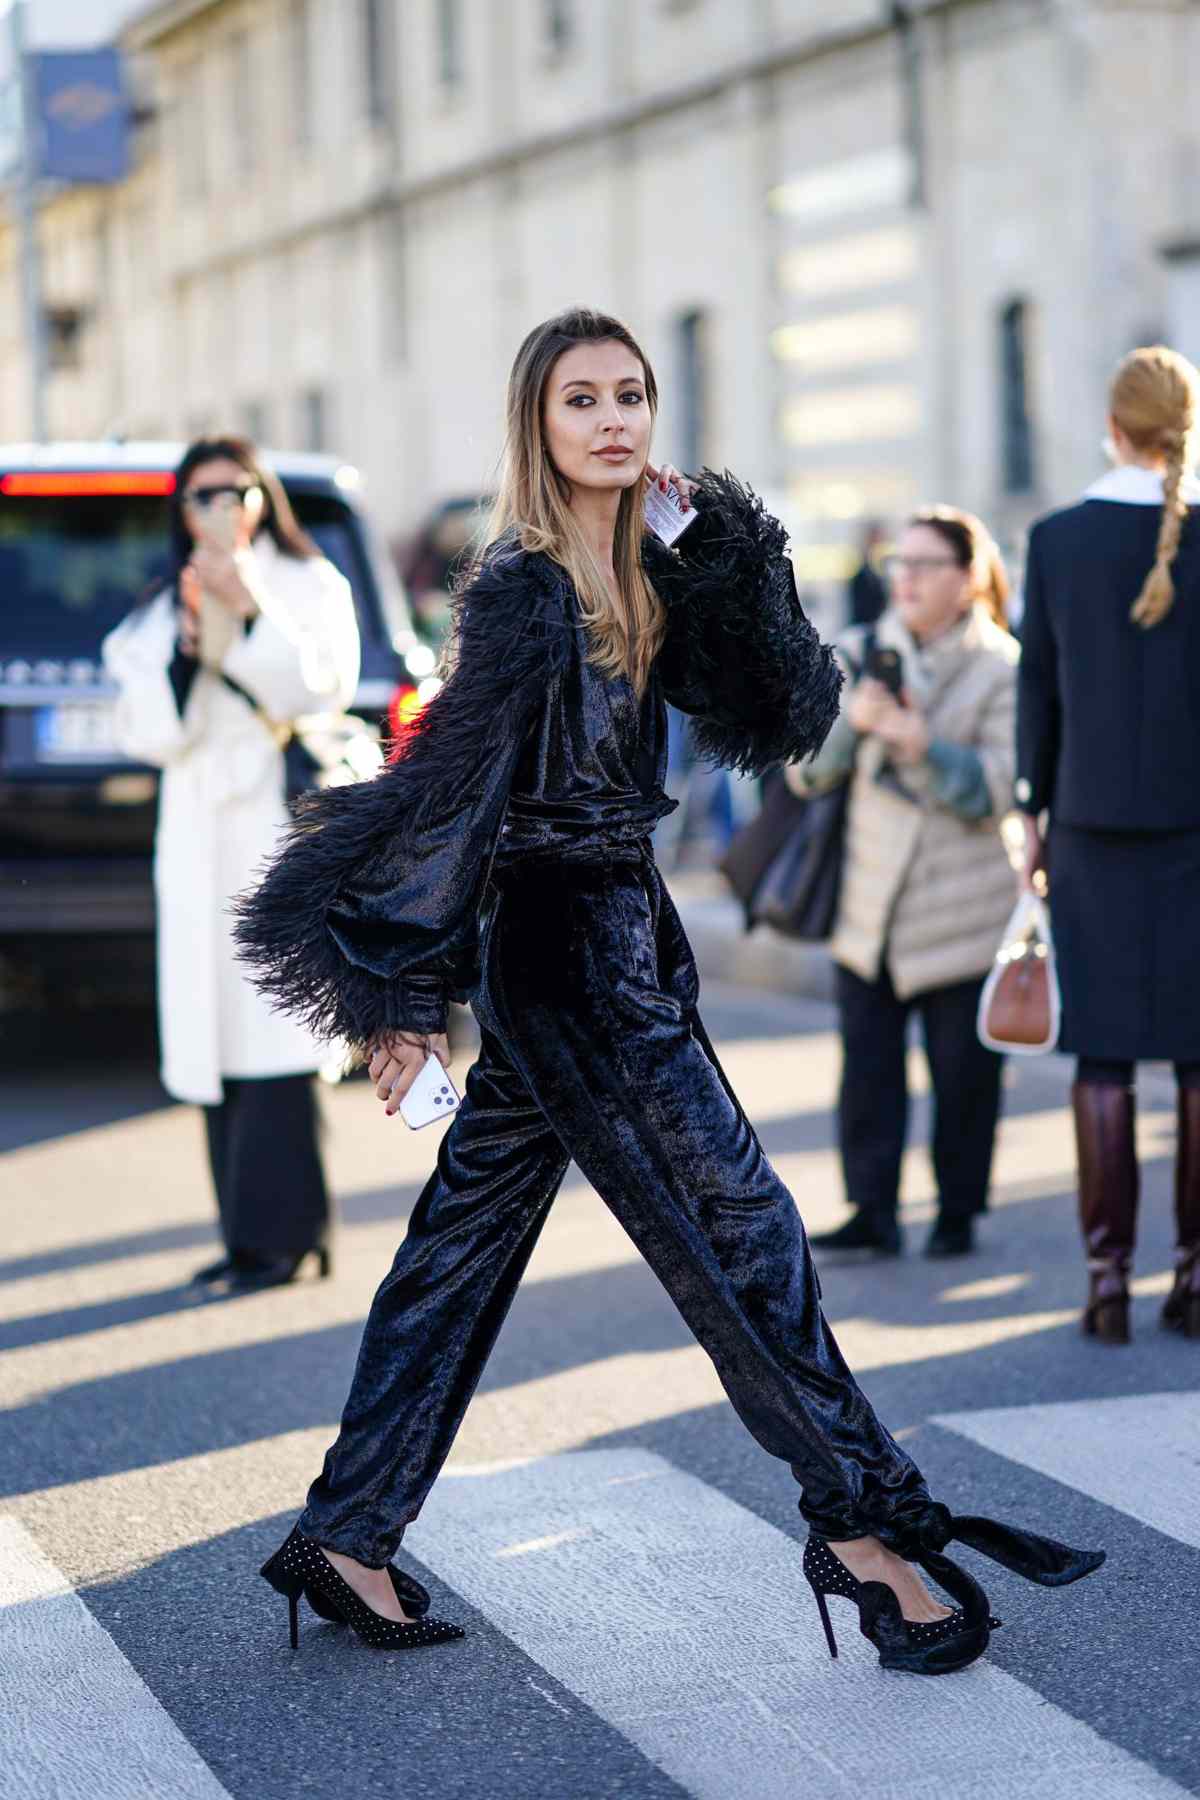 What To Wear On New Year’s Eve, Based On Your Zodiac Sign